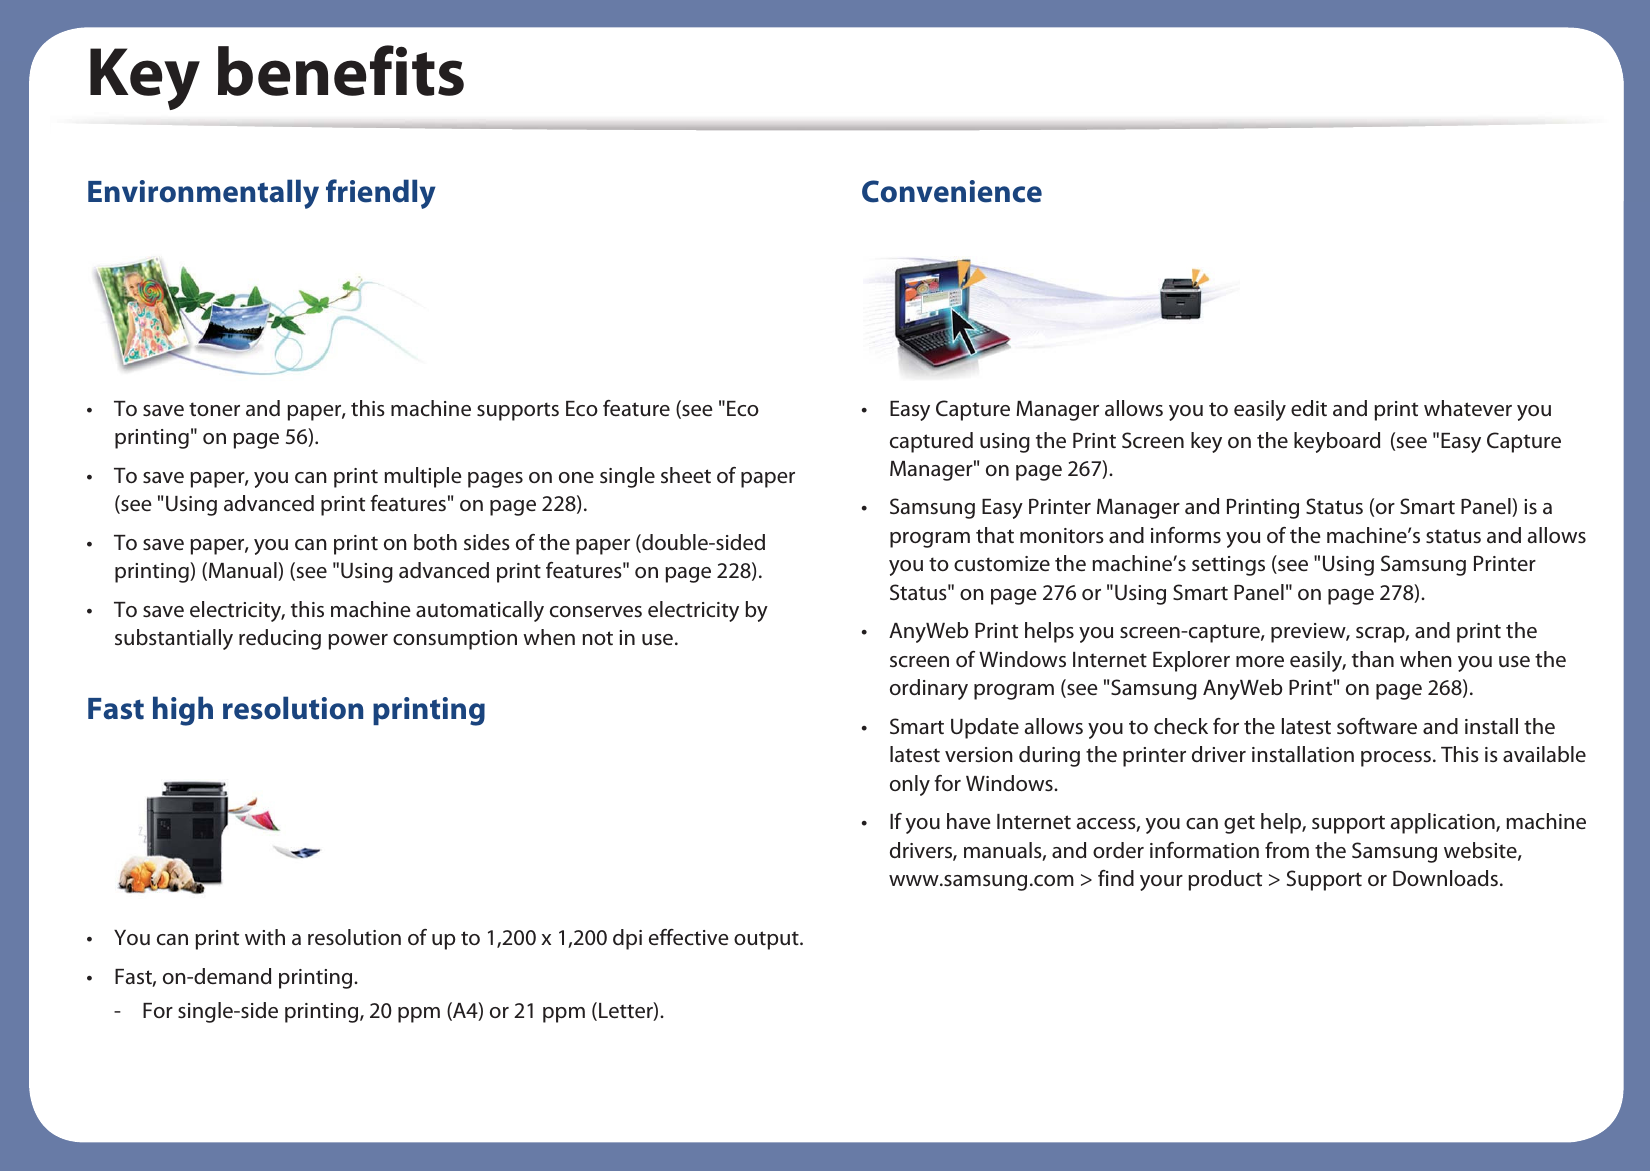 Key benefitsEnvironmentally friendly• To save toner and paper, this machine supports Eco feature (see &quot;Eco printing&quot; on page 56).• To save paper, you can print multiple pages on one single sheet of paper (see &quot;Using advanced print features&quot; on page 228).• To save paper, you can print on both sides of the paper (double-sided printing) (Manual) (see &quot;Using advanced print features&quot; on page 228).• To save electricity, this machine automatically conserves electricity by substantially reducing power consumption when not in use.Fast high resolution printing• You can print with a resolution of up to 1,200 x 1,200 dpi effective output.• Fast, on-demand printing.- For single-side printing, 20 ppm (A4) or 21 ppm (Letter).Convenience• Easy Capture Manager allows you to easily edit and print whatever you captured using the Print Screen key on the keyboardG(see &quot;Easy Capture Manager&quot; on page 267).• Samsung Easy Printer Manager and Printing Status (or Smart Panel) is a program that monitors and informs you of the machine’s status and allows you to customize the machine’s settings (see &quot;Using Samsung Printer Status&quot; on page 276 or &quot;Using Smart Panel&quot; on page 278).• AnyWeb Print helps you screen-capture, preview, scrap, and print the screen of Windows Internet Explorer more easily, than when you use the ordinary program (see &quot;Samsung AnyWeb Print&quot; on page 268).• Smart Update allows you to check for the latest software and install the latest version during the printer driver installation process. This is available only for Windows.• If you have Internet access, you can get help, support application, machine drivers, manuals, and order information from the Samsung website, www.samsung.com &gt; find your product &gt; Support or Downloads.